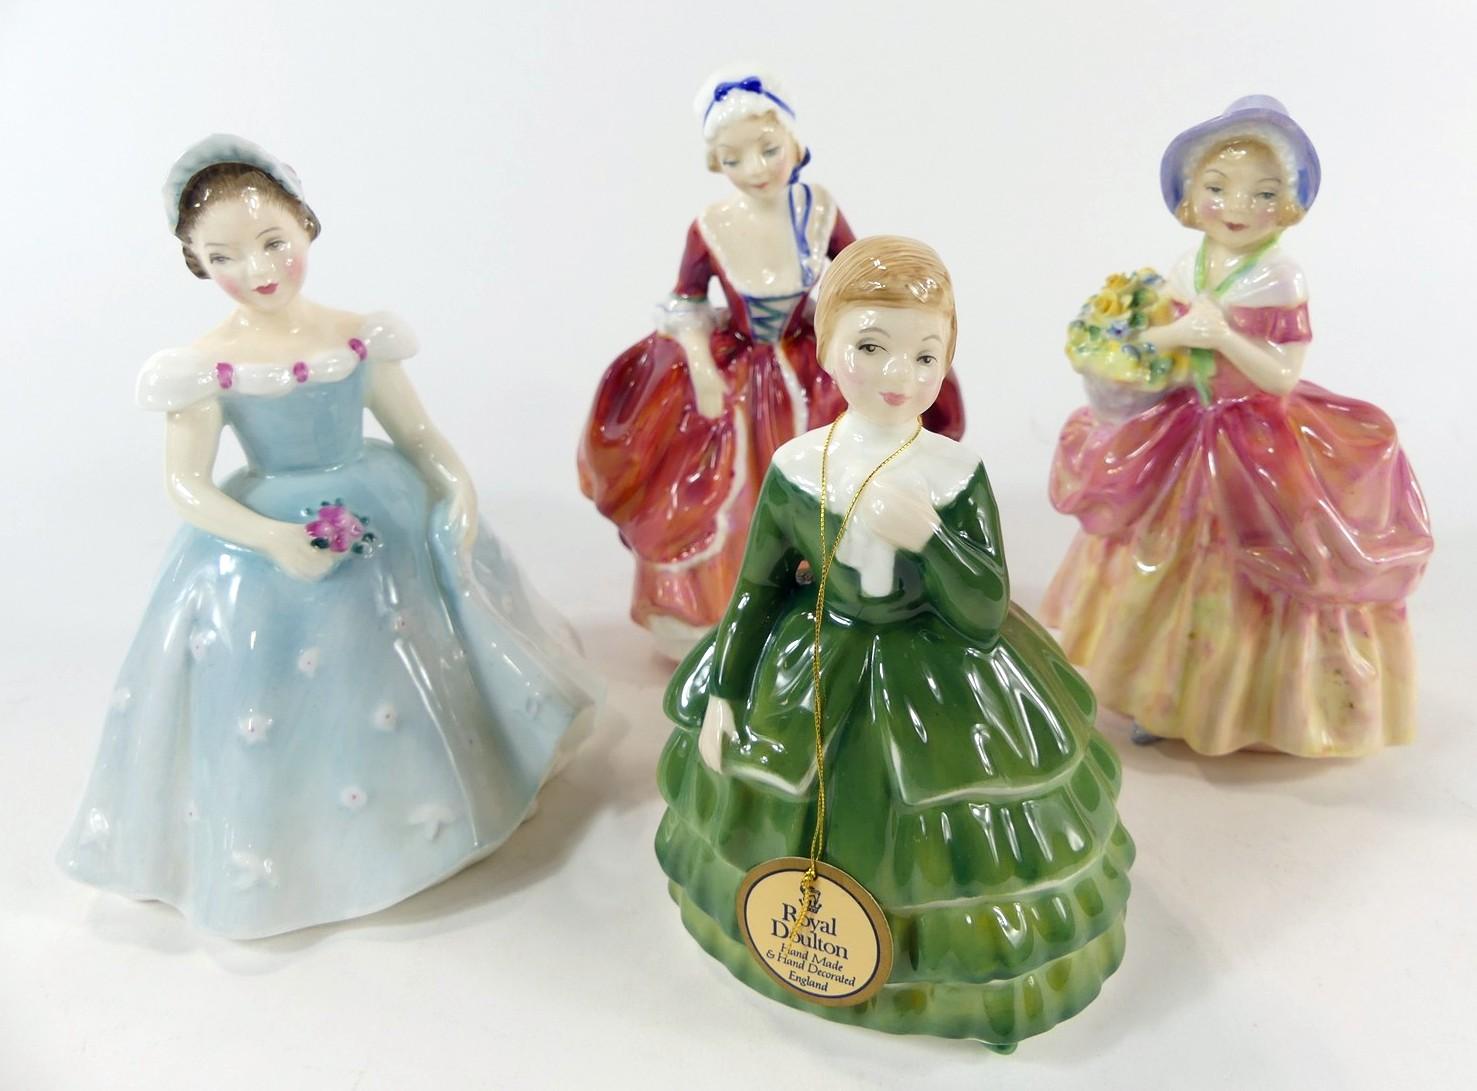 4 ROYAL DOULTON FIGURINES | FIGURINES FEATURING ROYAL DOULTON | Online ...